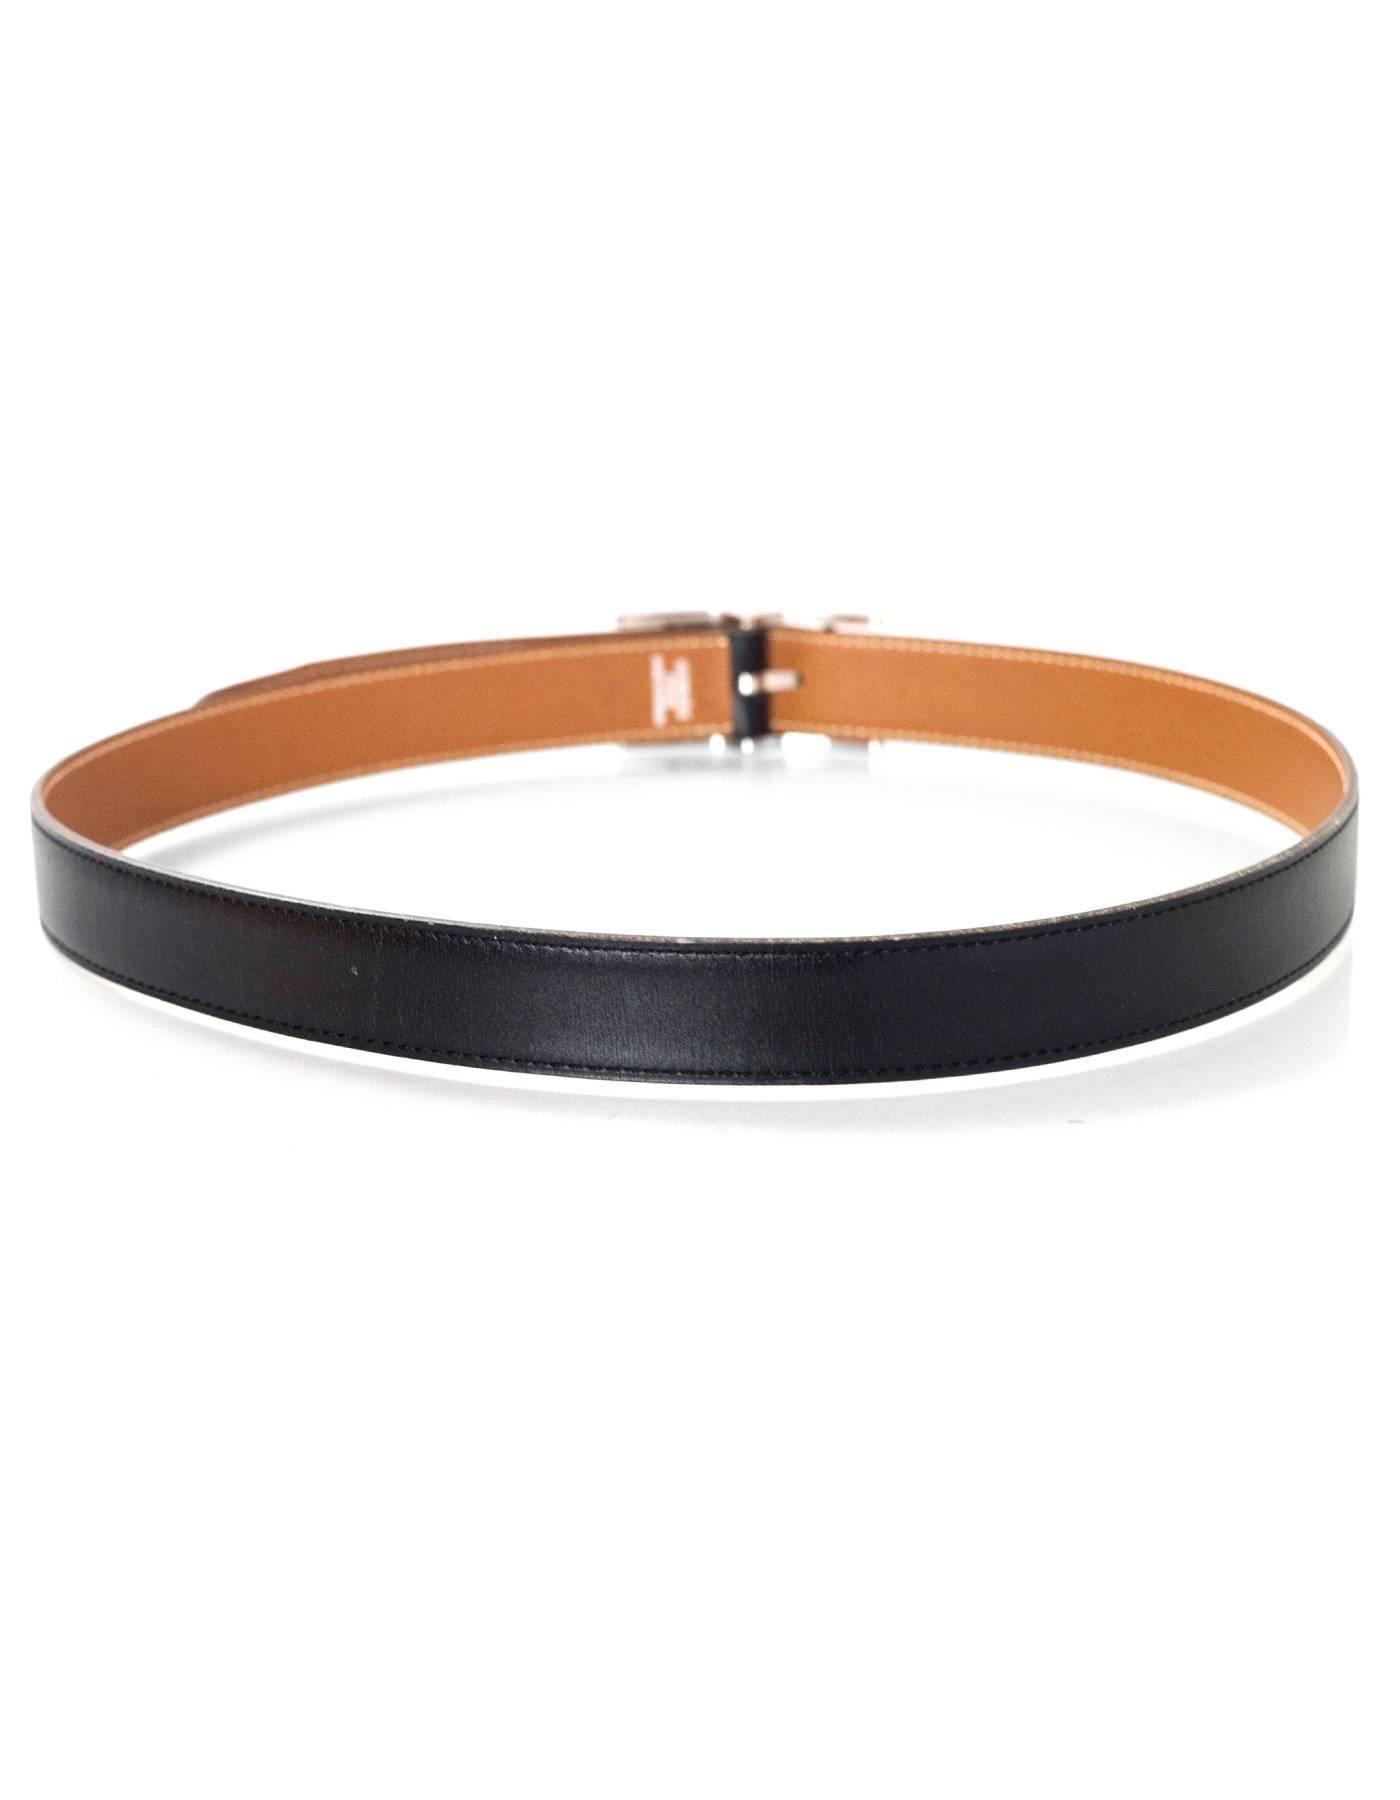 Hermes Black & Tan Reversible Hapi H Belt 

Made In: France
Year of Production: 1997
Color: Tan and black
Hardware: Palladium
Materials: Leather
Closure/Opening: Buckle and notch closure
Stamp: A stamp in square
Overall Condition: Very good